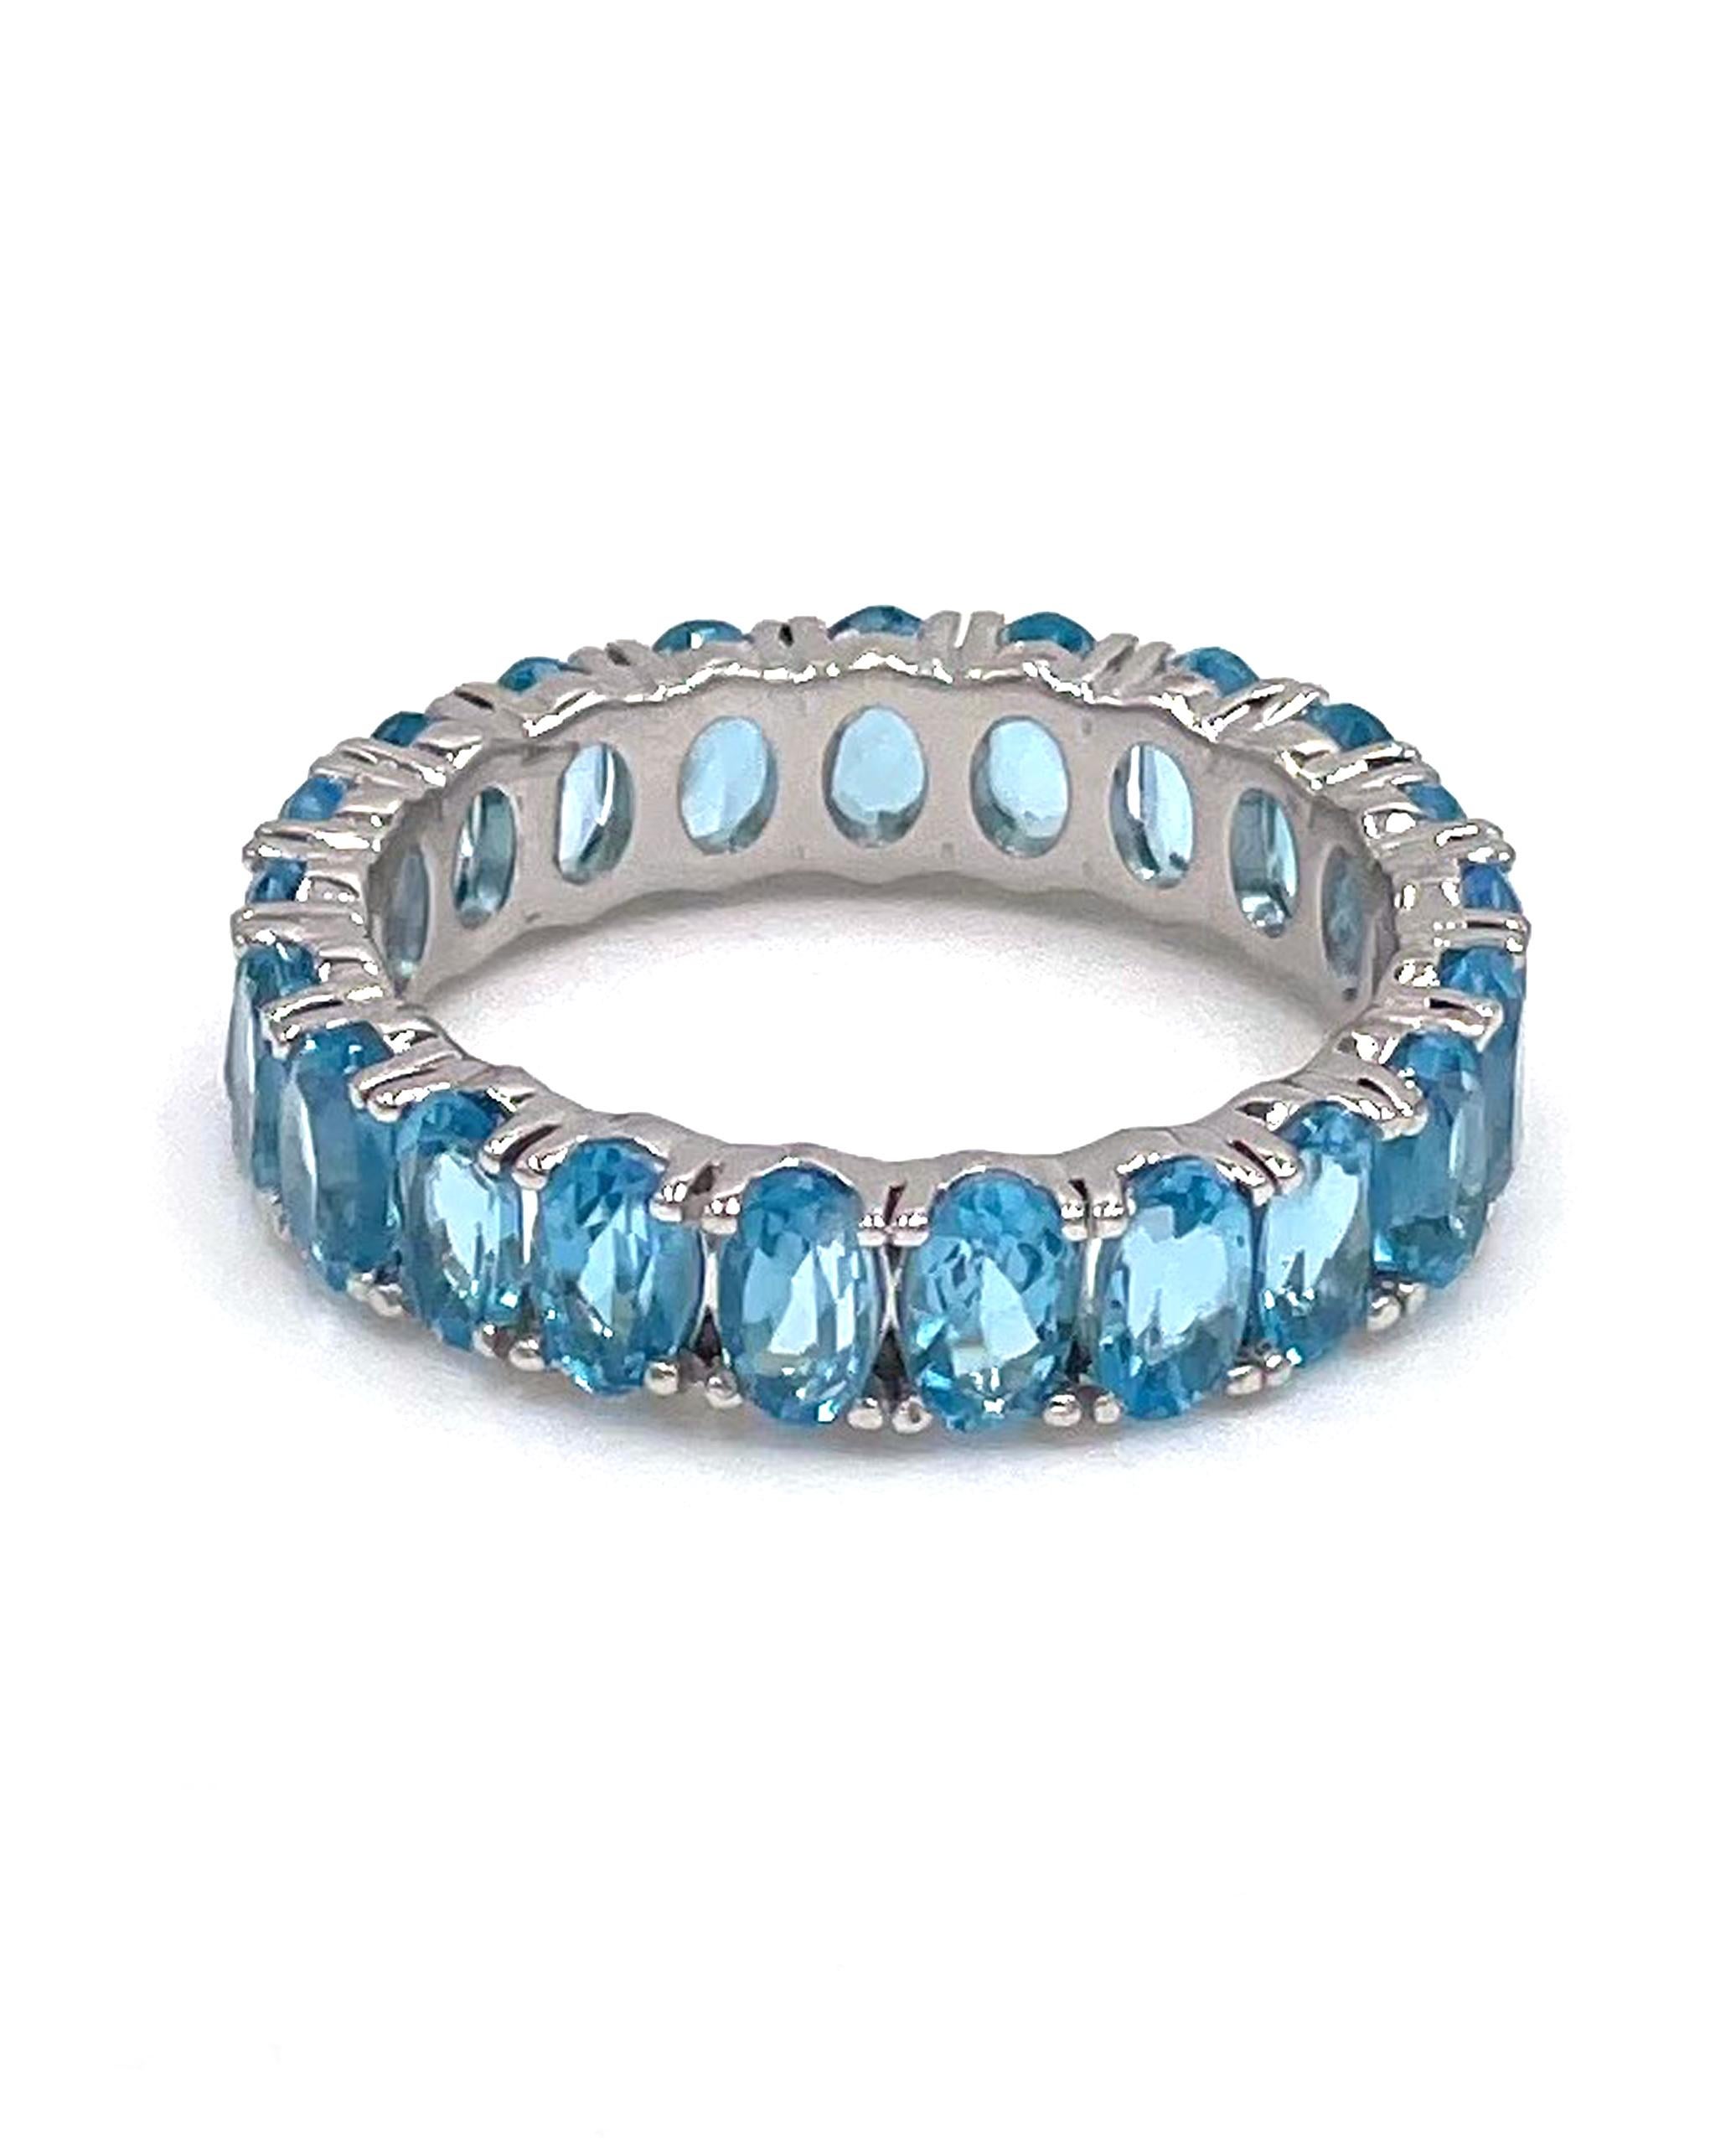 14K white gold eternity ring with 21 oval shaped sky blue topaz 6.64 carats total weight.

* Finger size 8
* 5.10mm wide